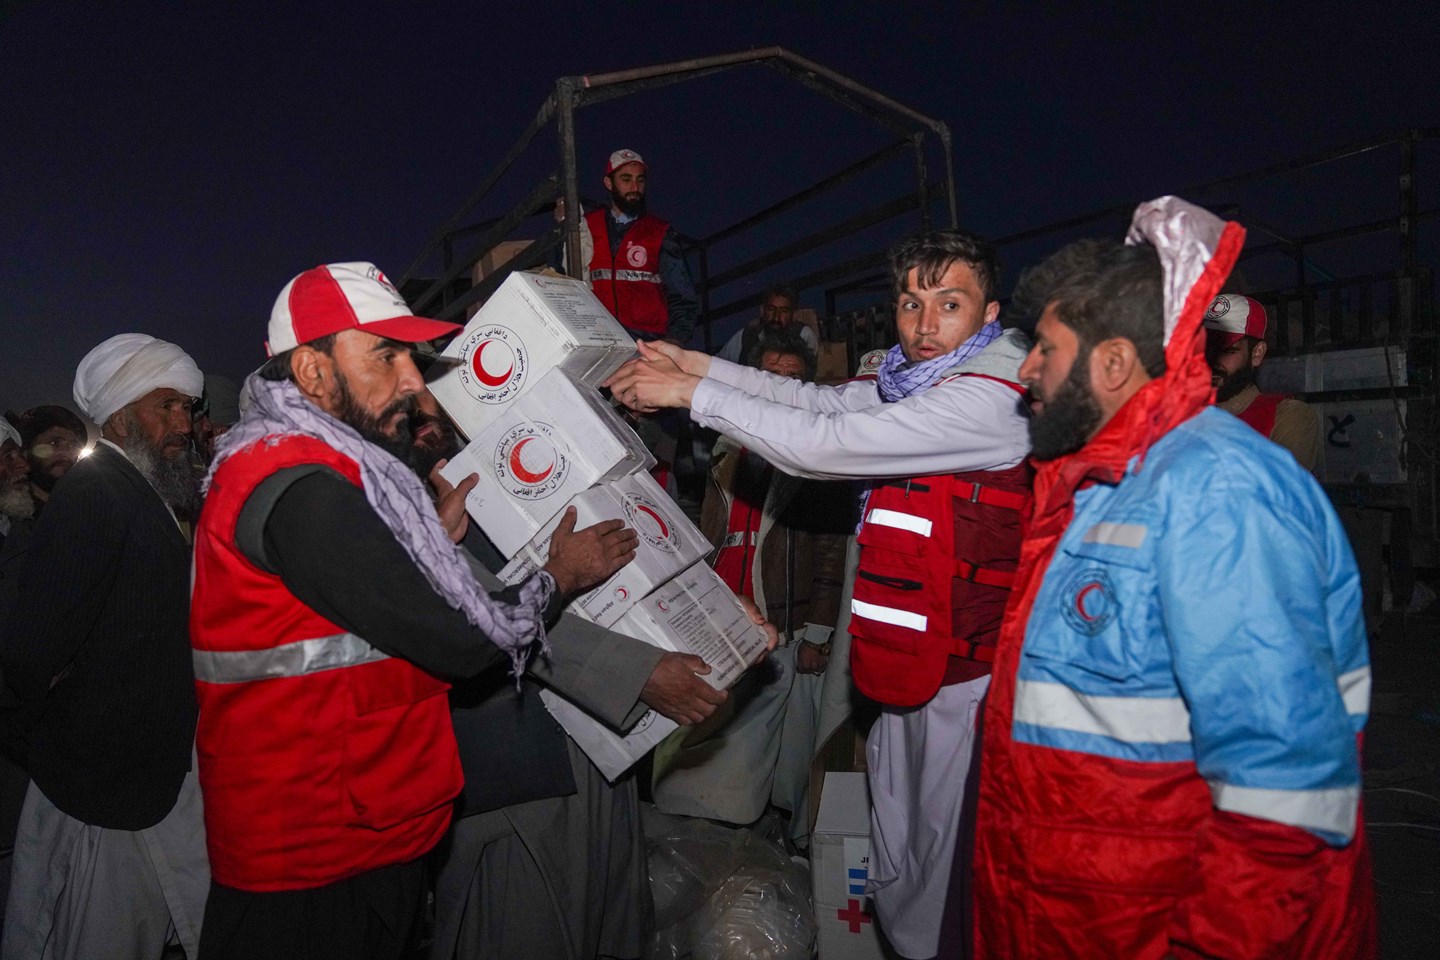 Three volunteers wearing Red Crescent vests lifting boxes with the Red Crescent symbol on them.